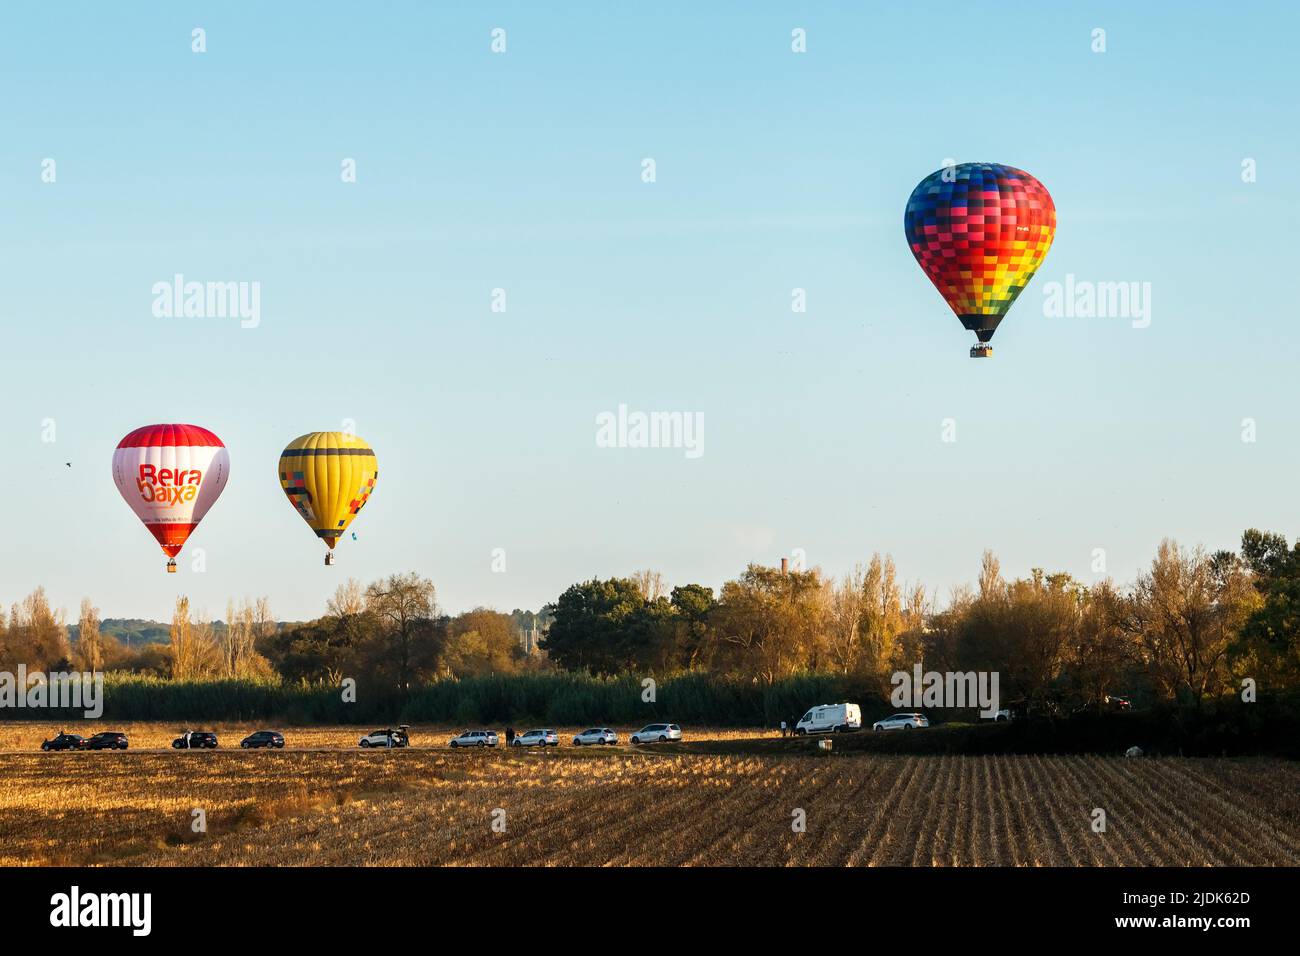 Coruche, Portugal - November 13, 2021: Three hot air balloons flying in the late afternoon over agricultural fields and tree line in Coruche, Portugal Stock Photo